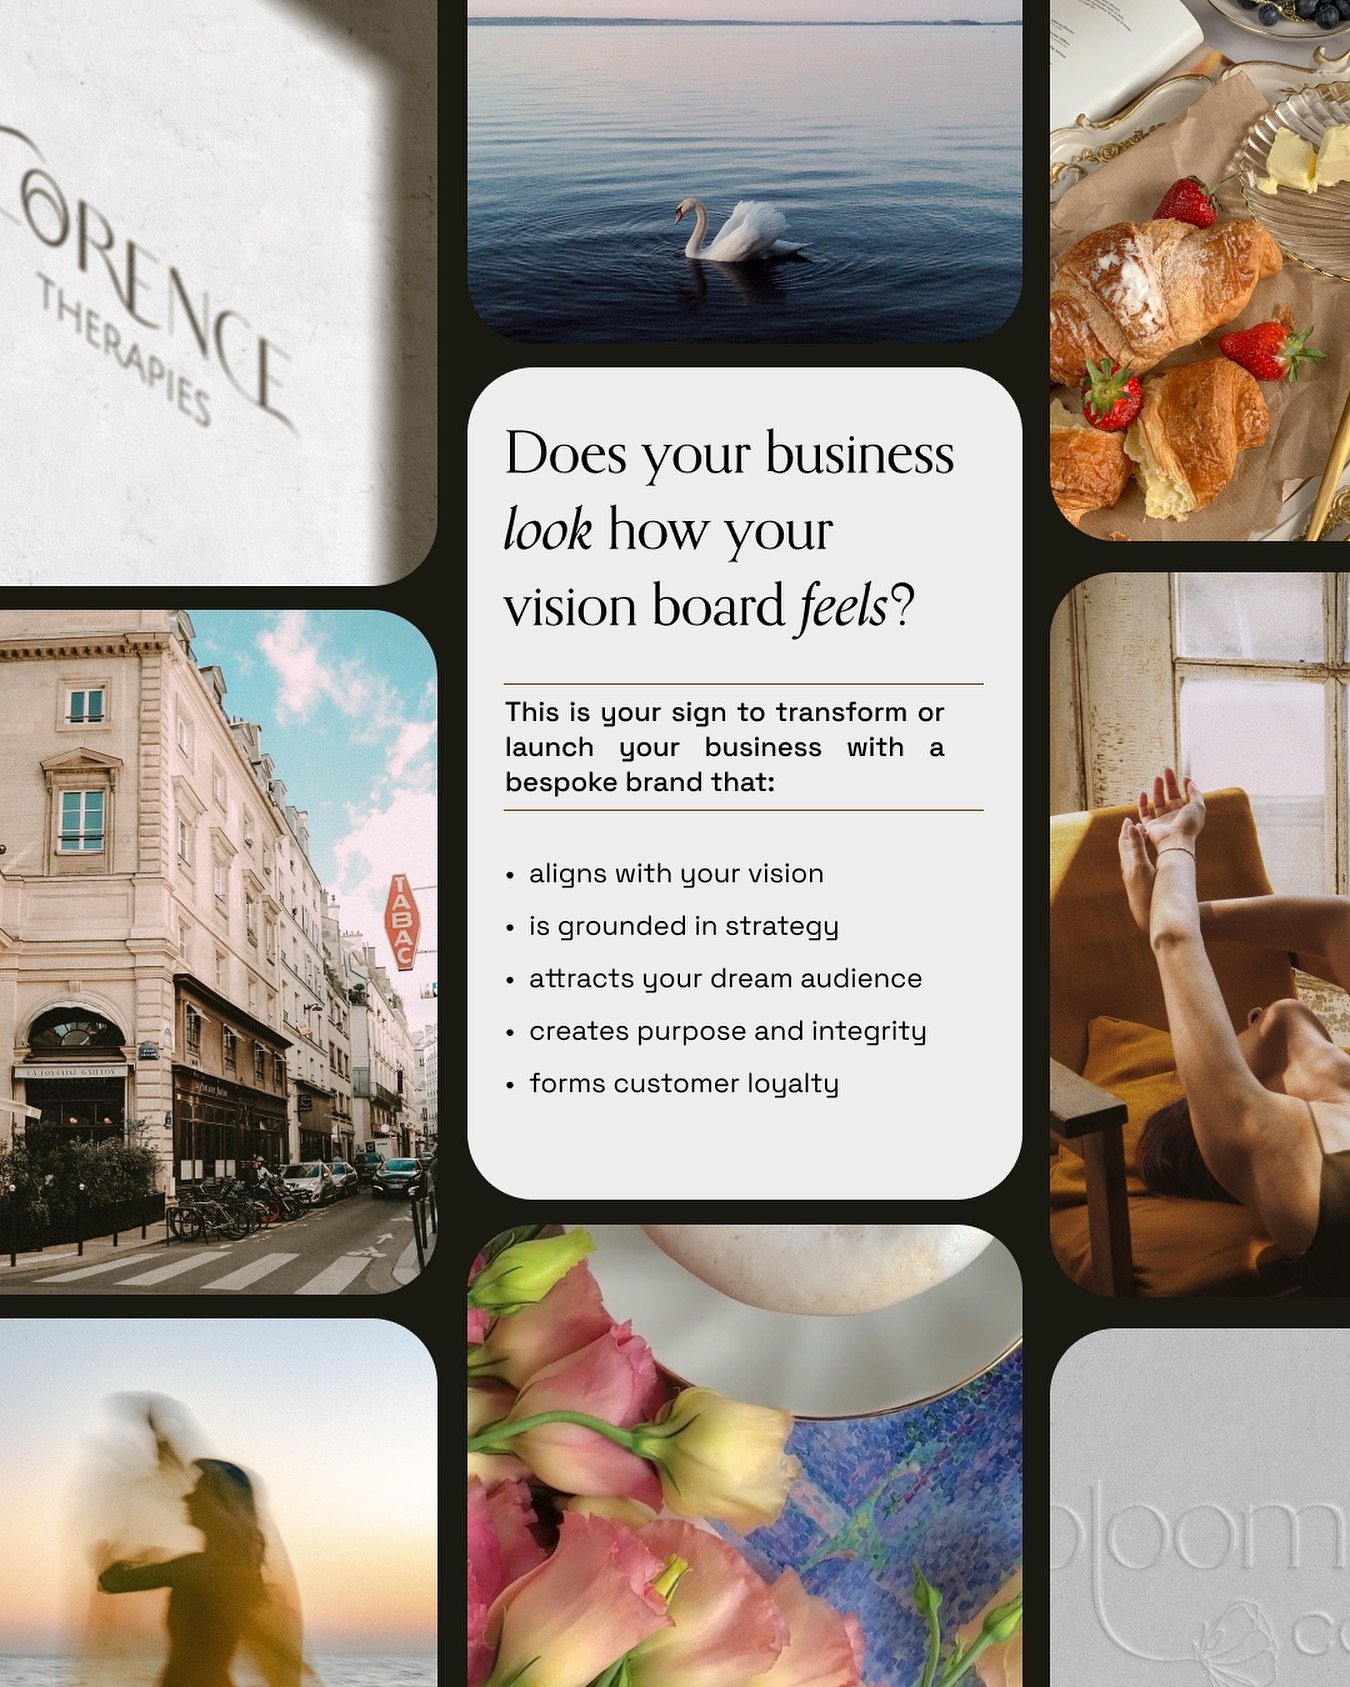 You know the vision board I mean, the one you&rsquo;ve saved all your dreamy pins to. What you *wish* your brand embodied: the aesthetic social posts, photography, print designs, creative marketing ideas, the effortless appeal.

What&rsquo;s stopping